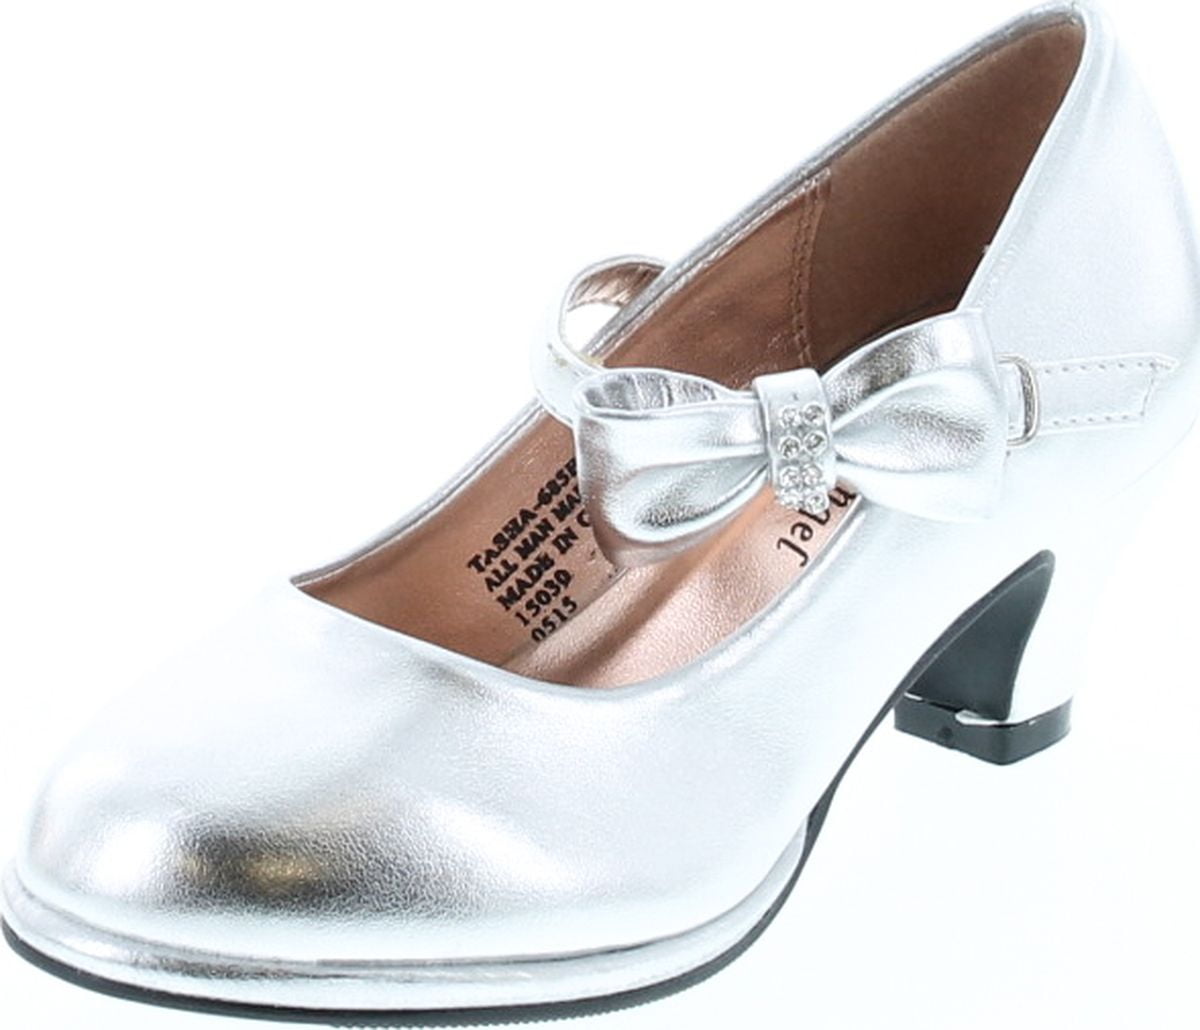 Details about   Swiggles Girls Toddler Silver Metallic Mary Jane Sandals Size L S 5-6 9-10 